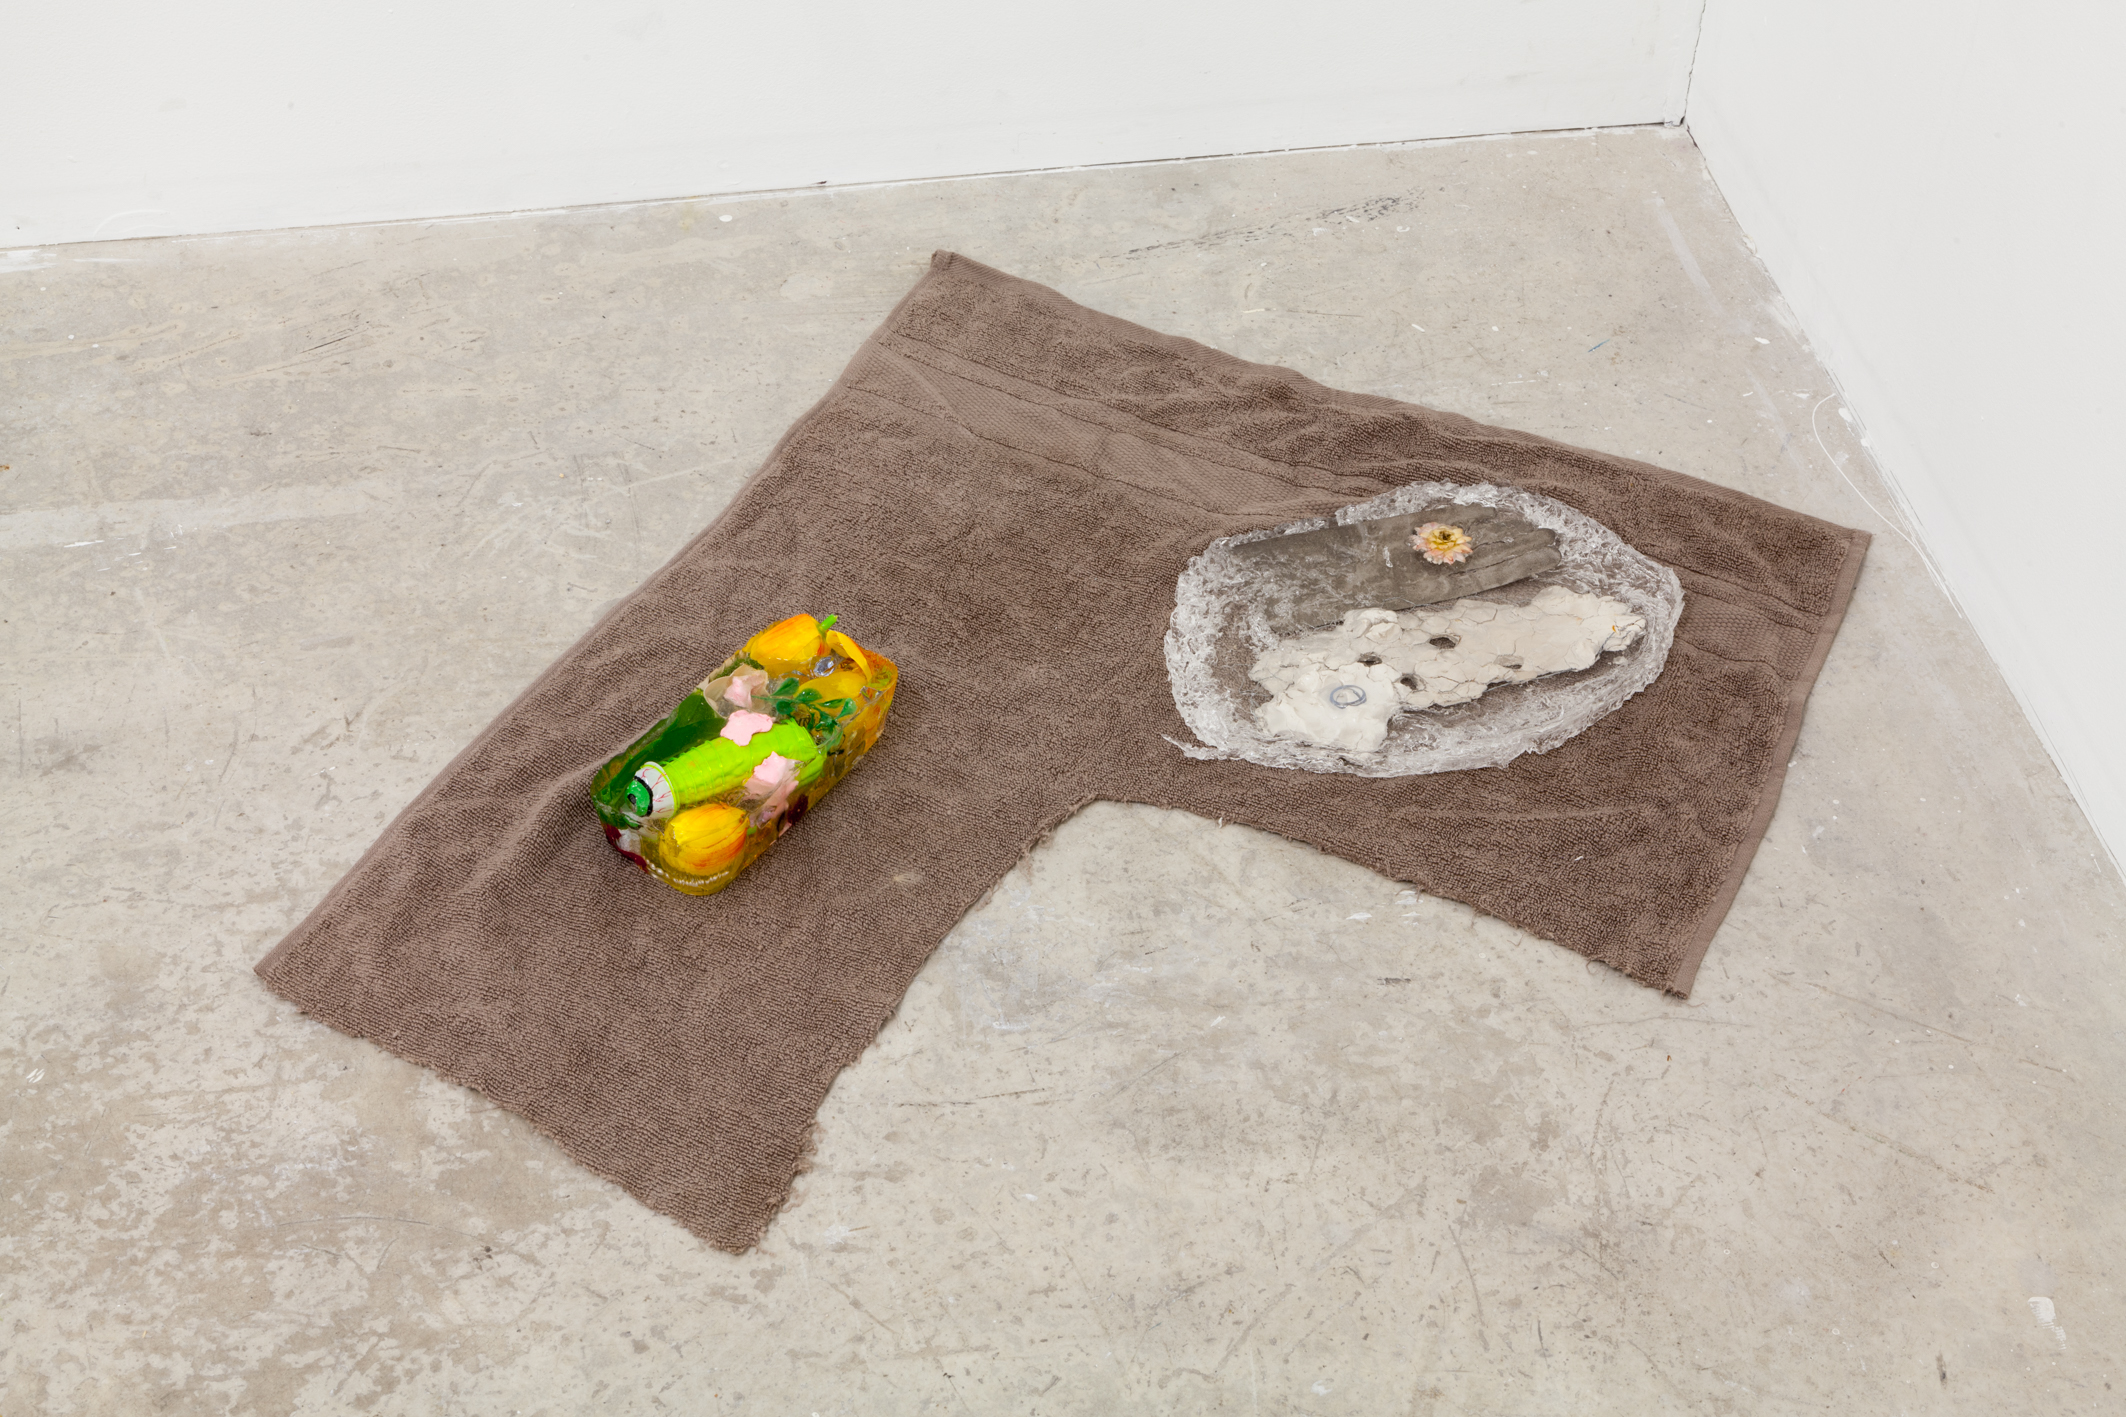 Marian Tubbs, “messmates”, 2015, found materials, breakable glass and towel, dimensions variable